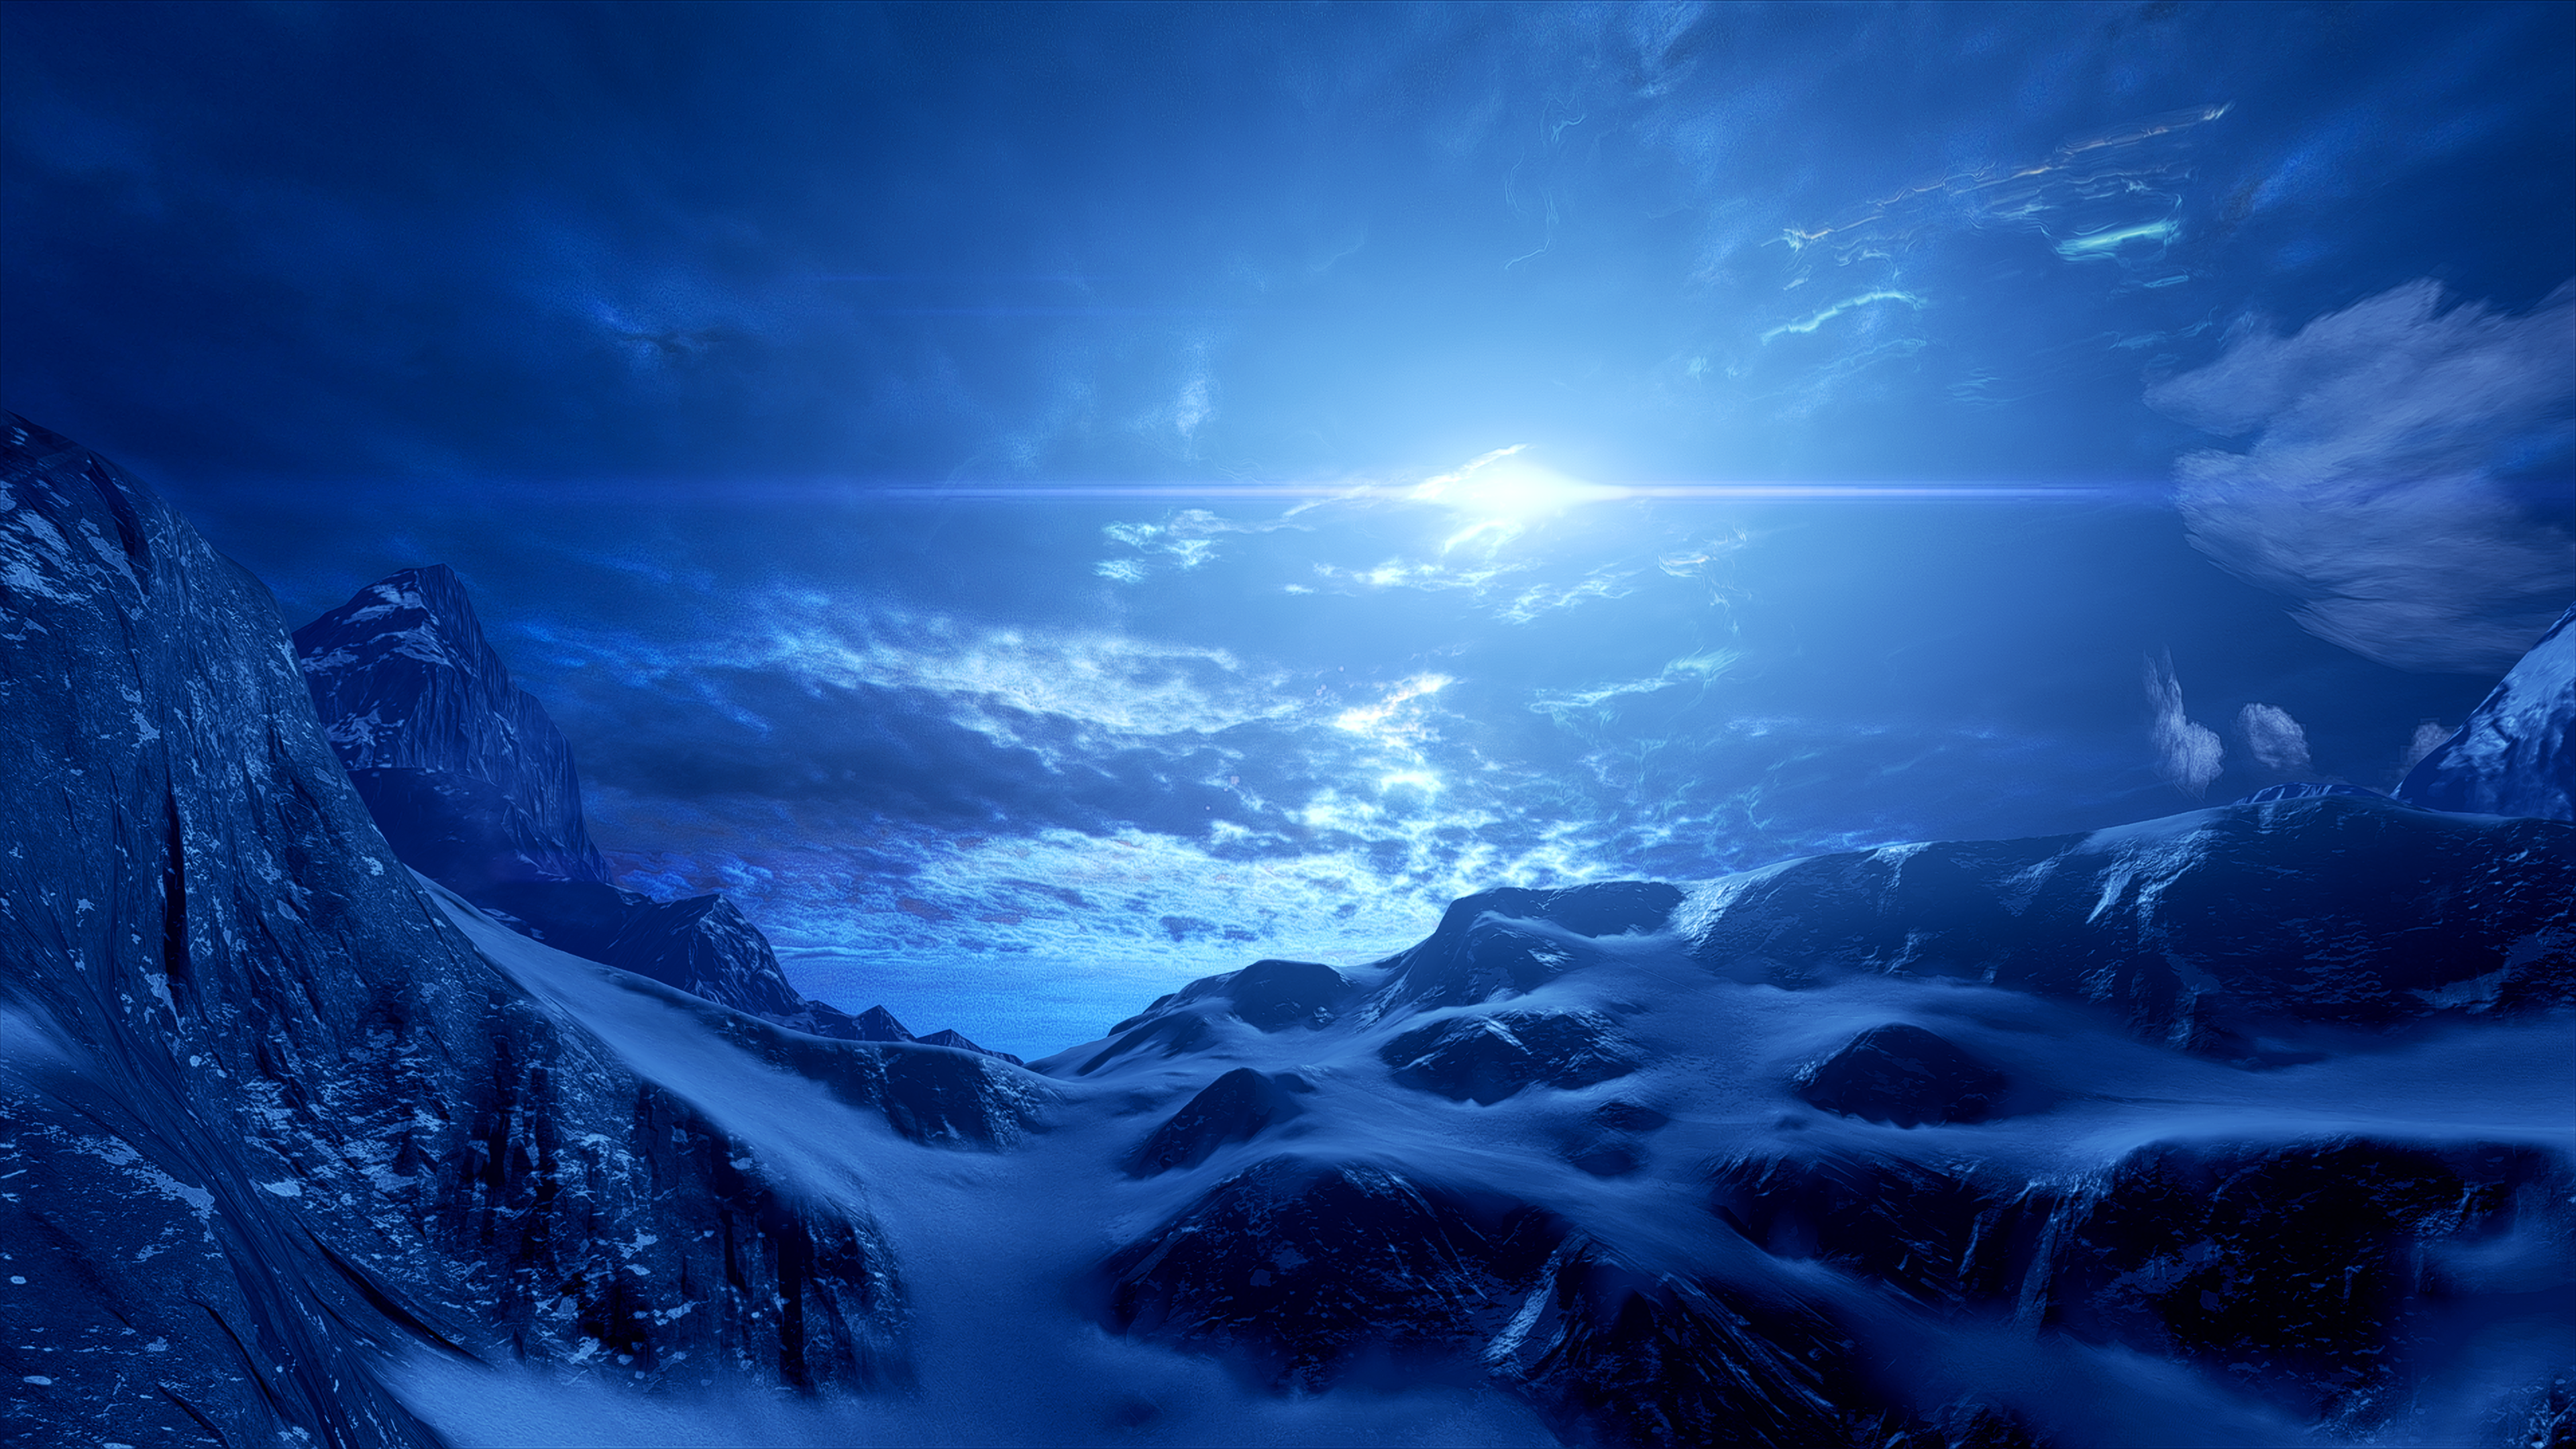 Mass Effect Andromeda Mountains Sky Sun Cold Snow Landscape Rocks Space Clouds Blue Video Games PC G 3840x2160